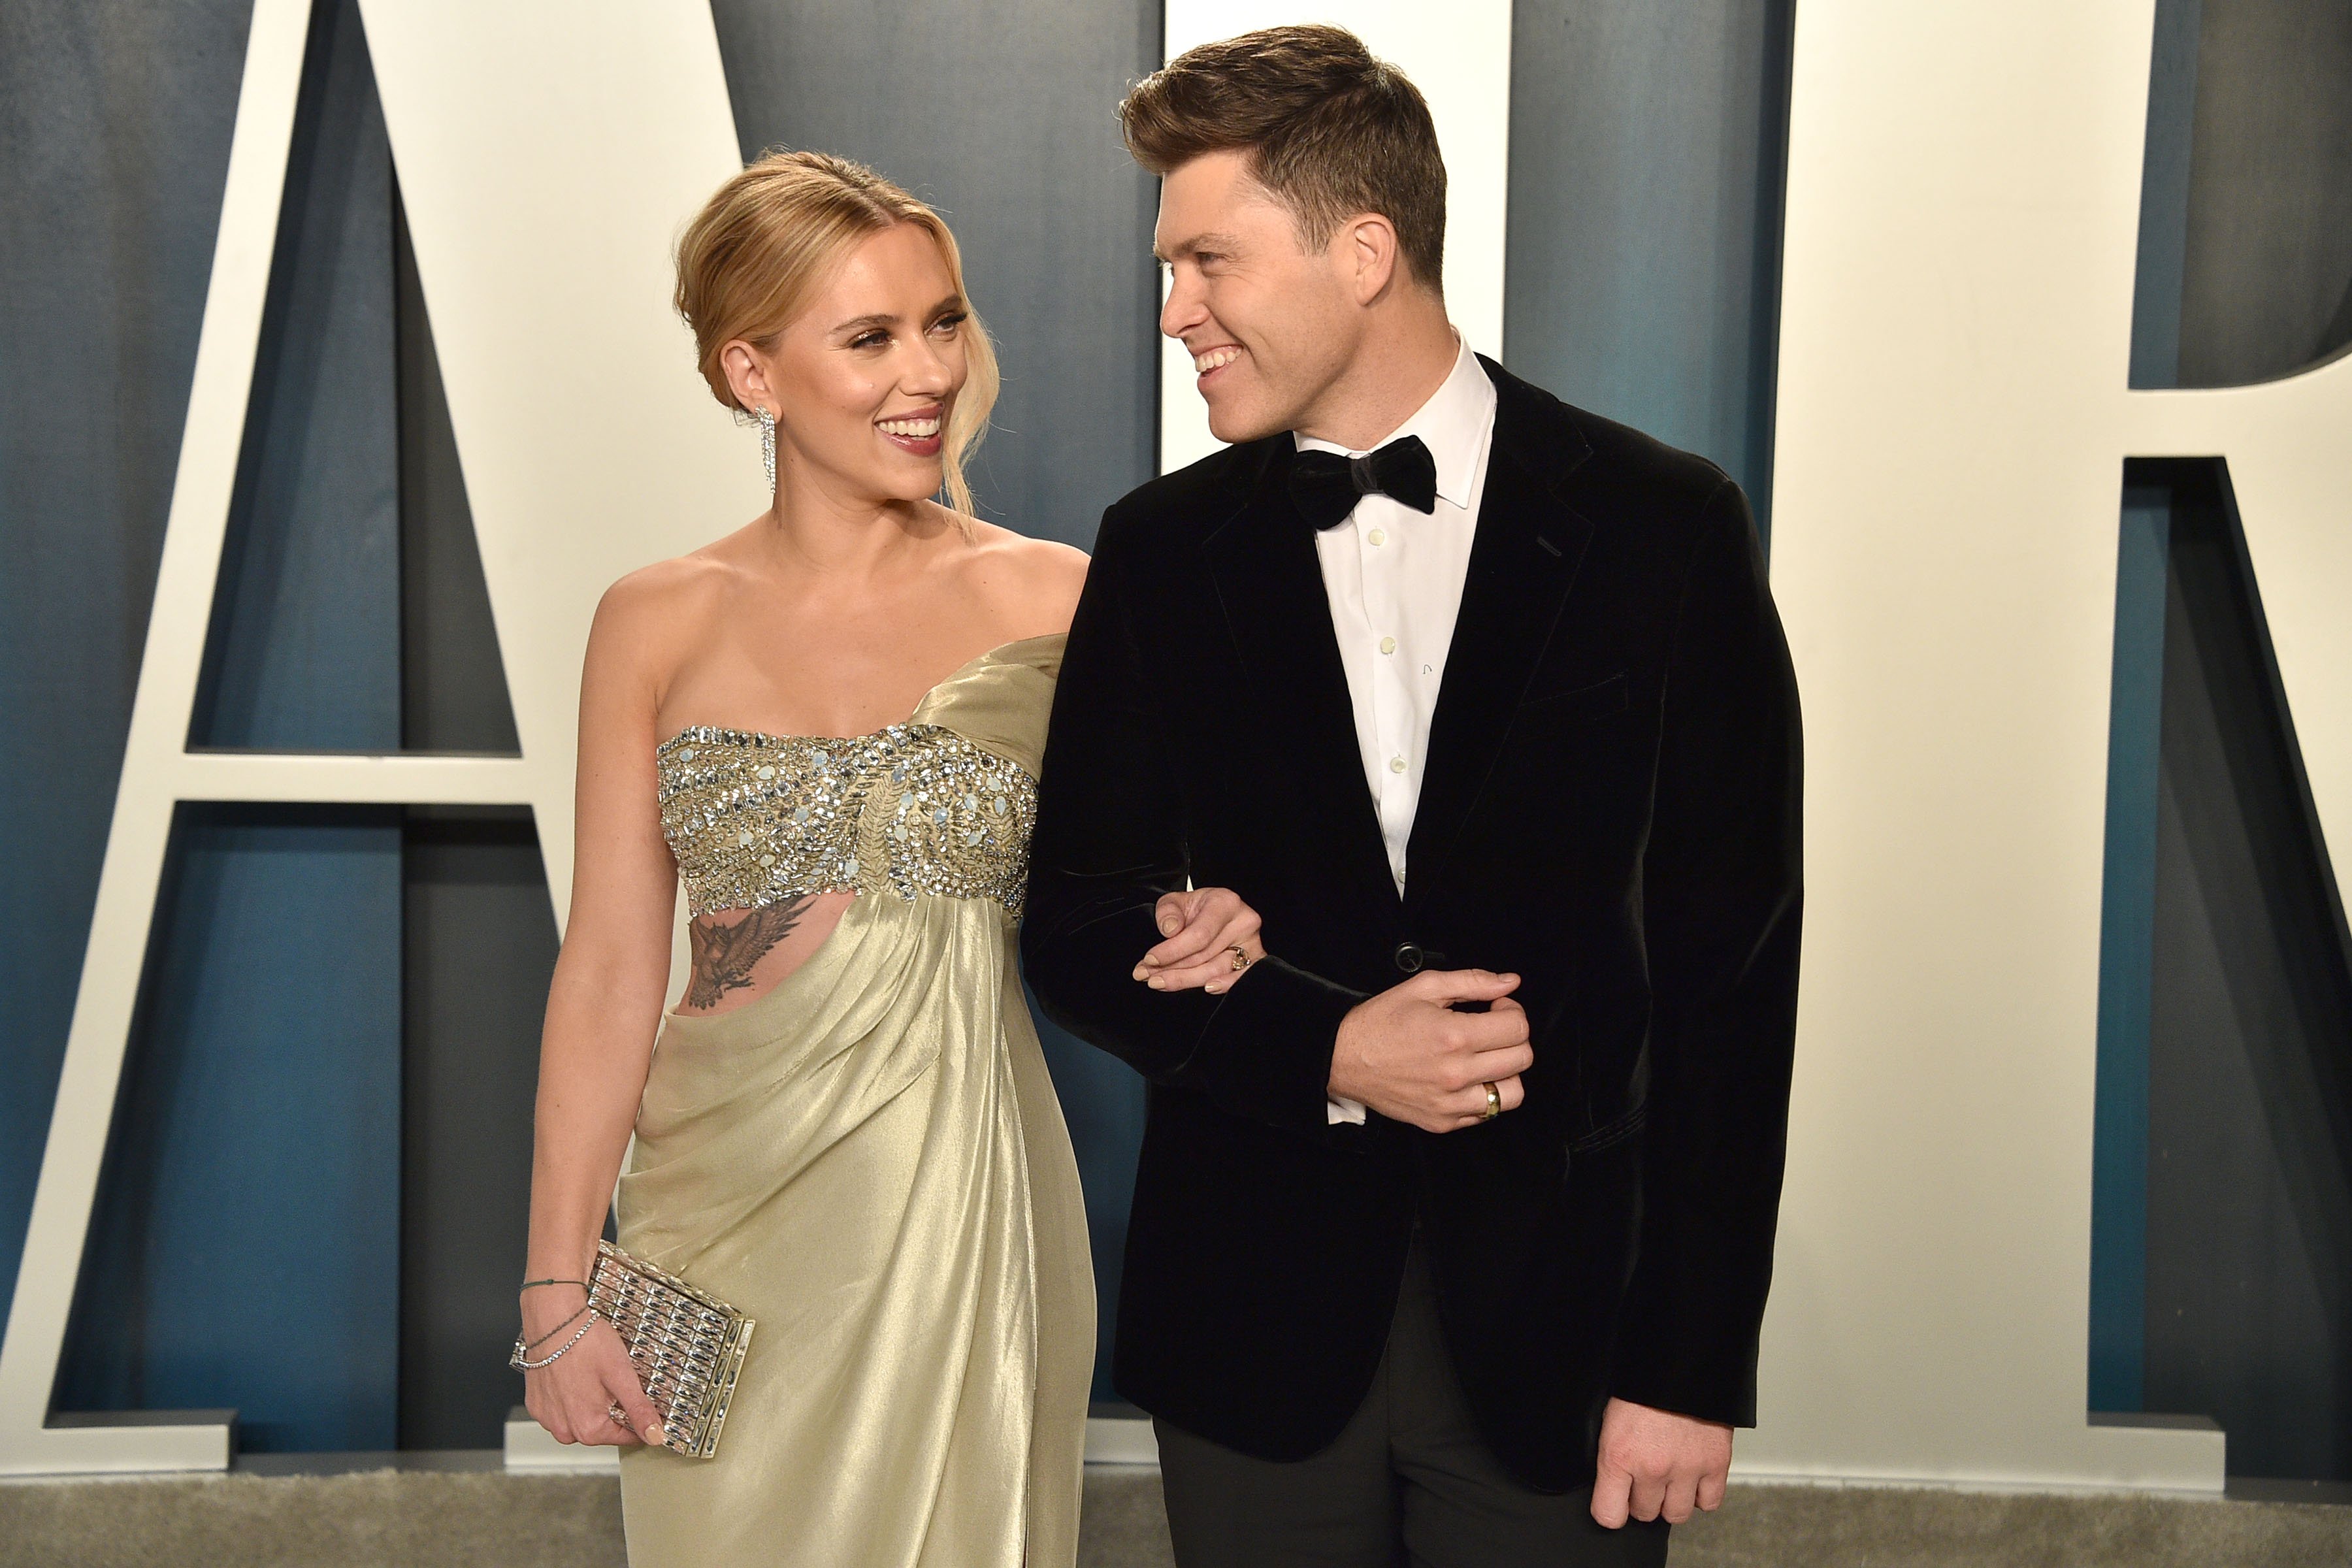 Scarlett Johansson and Colin Jost attend the 2020 Vanity Fair Oscar Party at Wallis Annenberg Center for the Performing Arts on February 09, 2020 in Beverly Hills, California | Photo: Getty Images